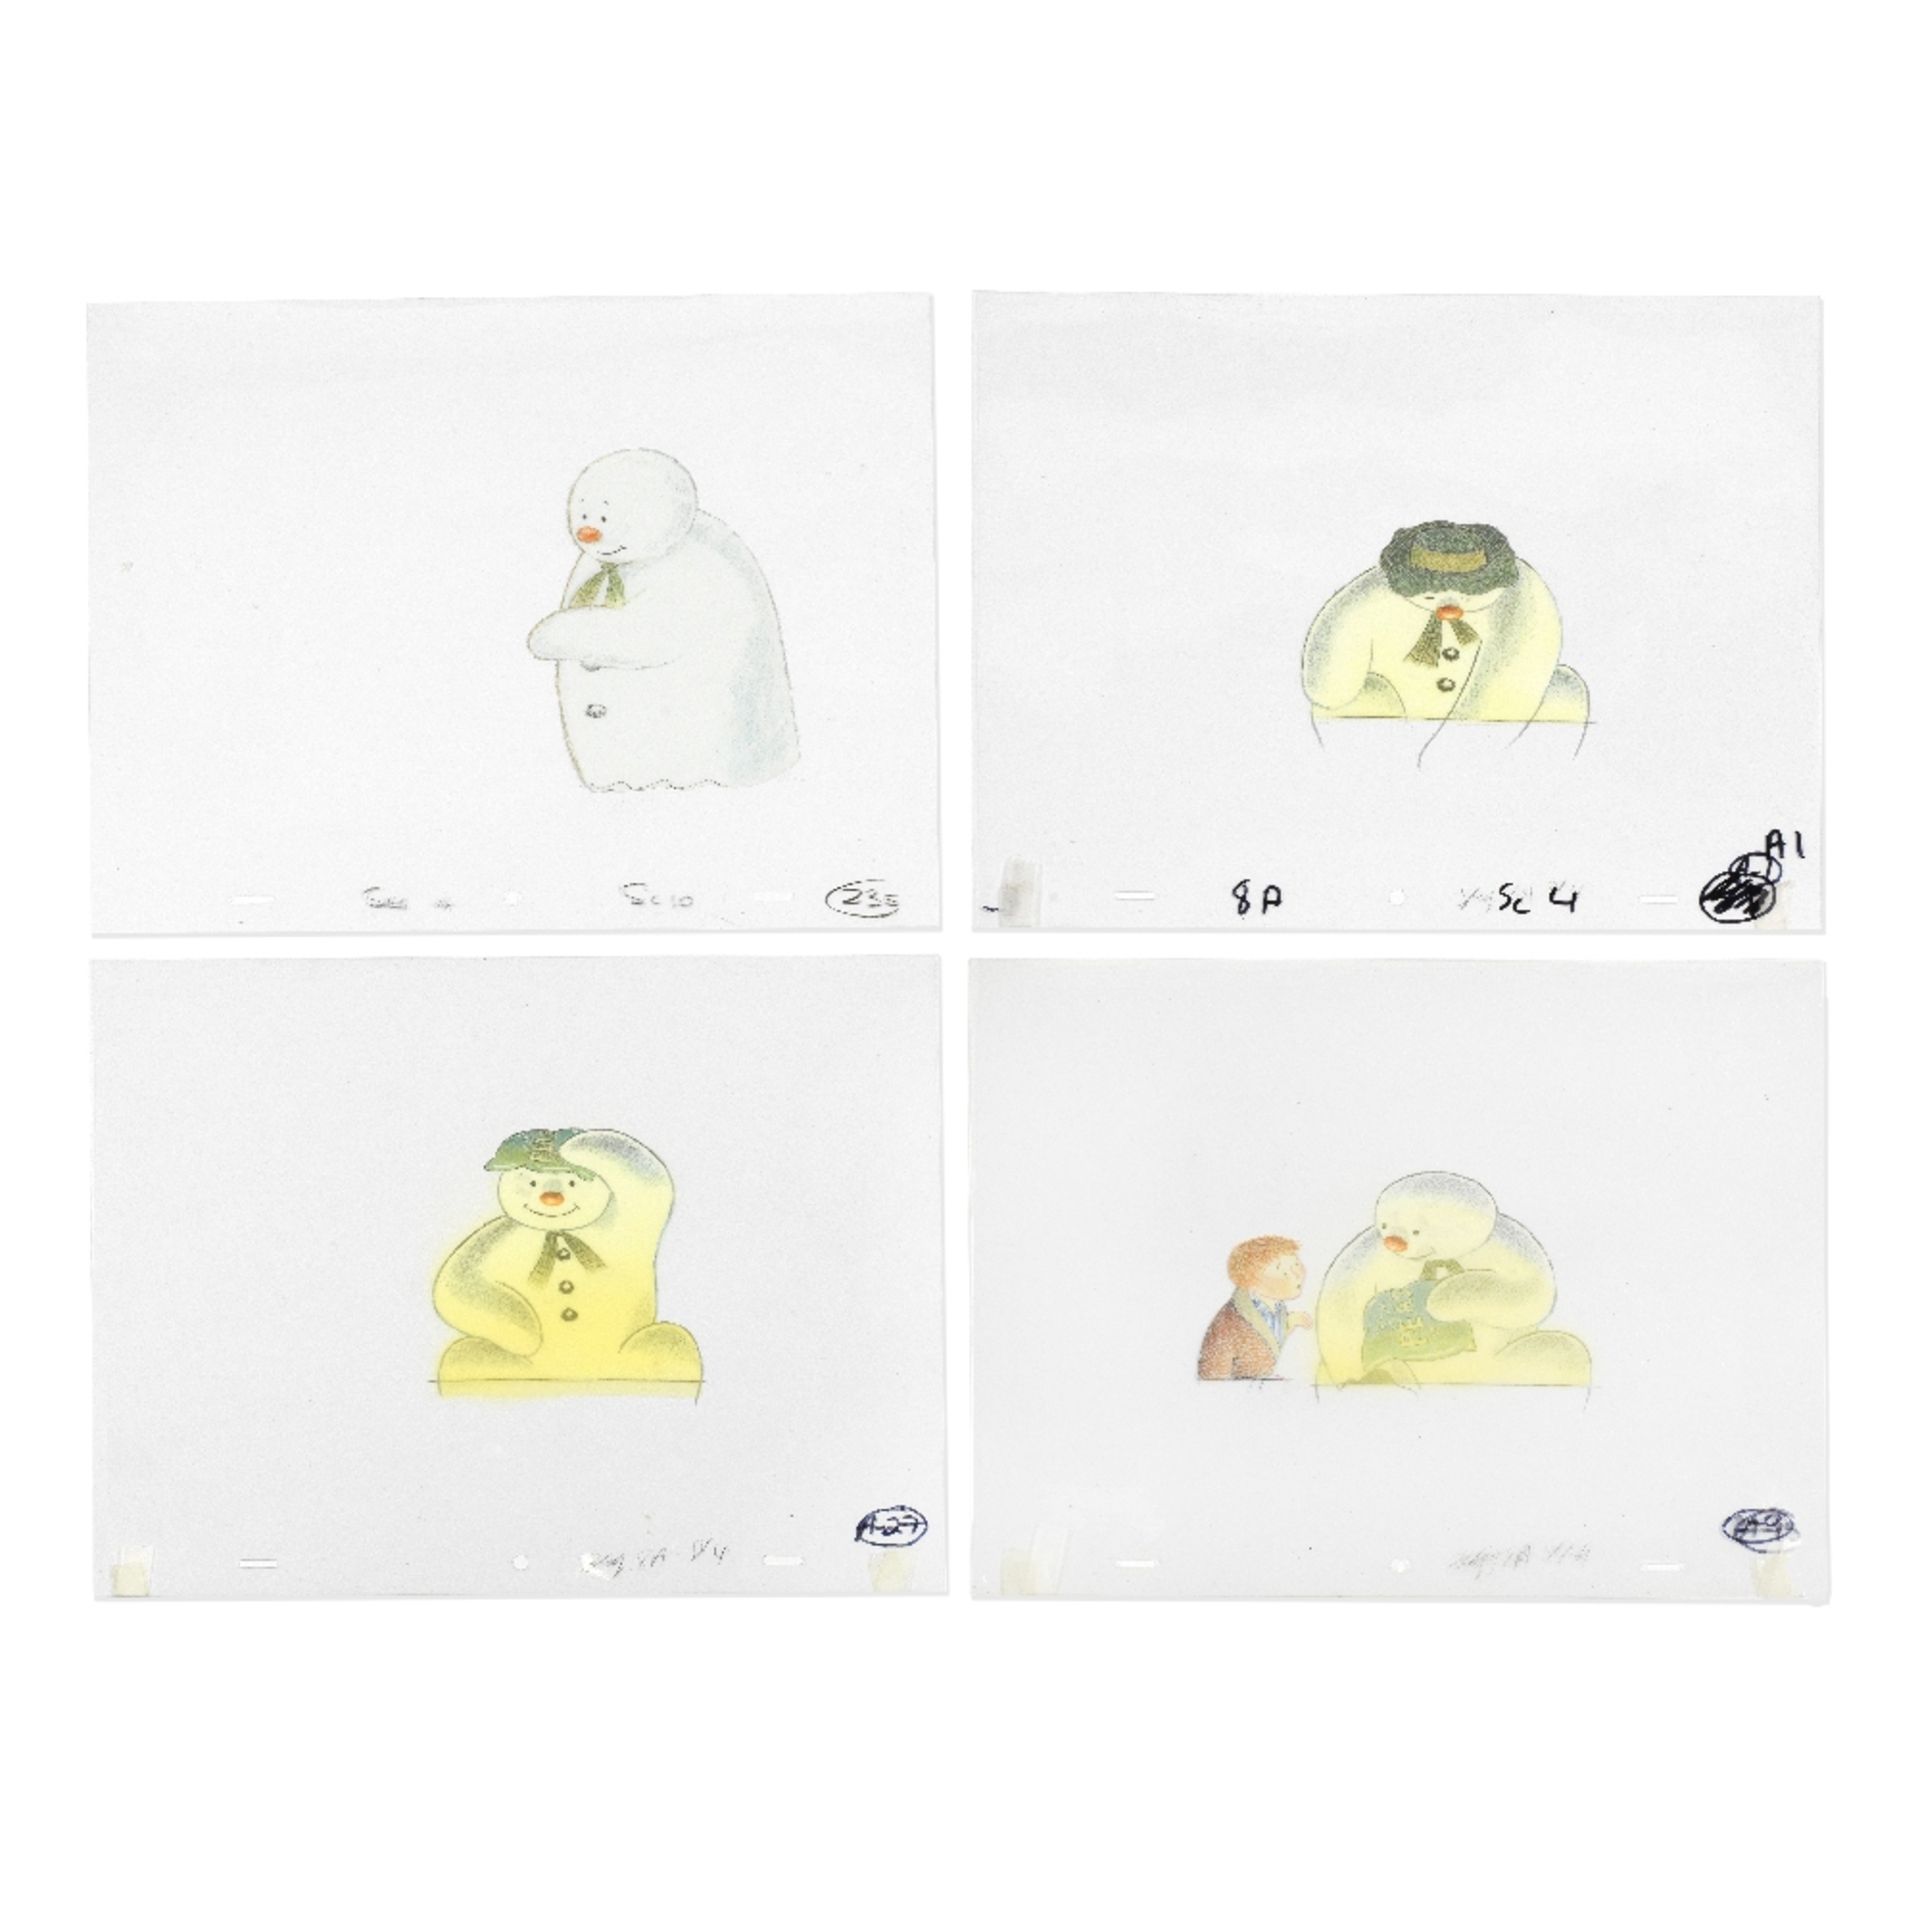 The Snowman: A Collection of Four Original Animation Cels of The Snowman and James from the Free...